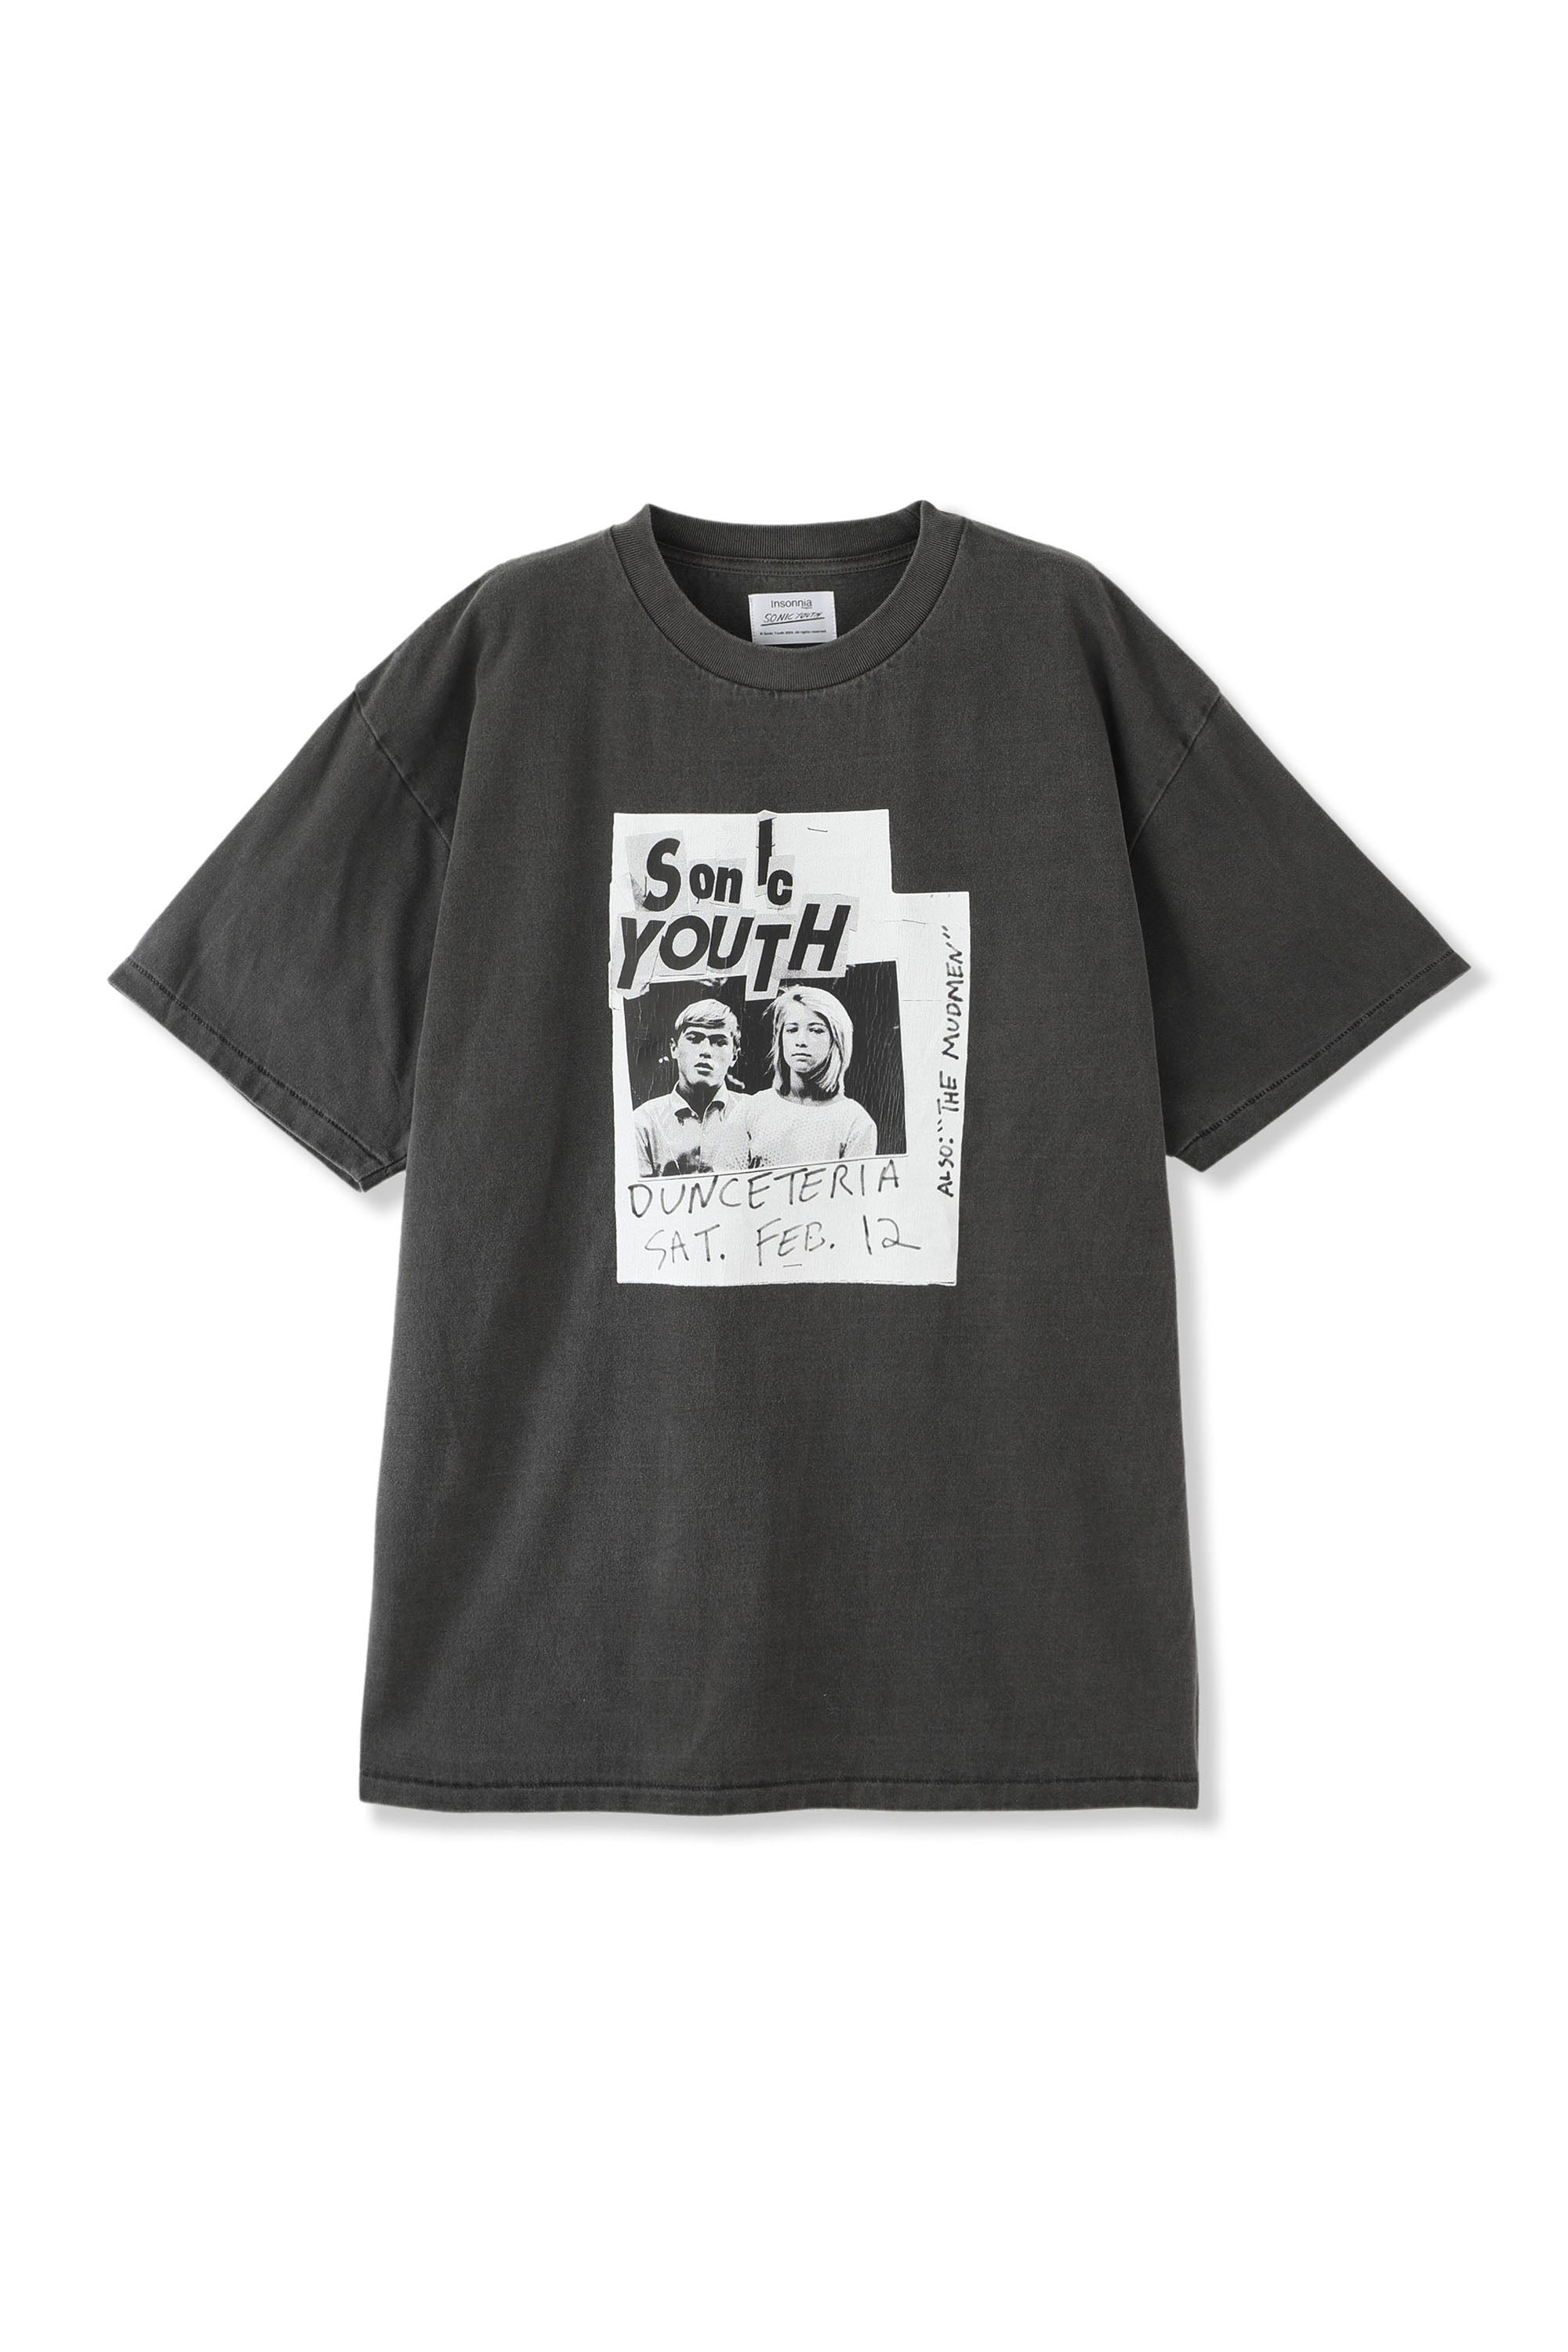 ×SONIC YOUTH DUNCETERIA TEE BLACK